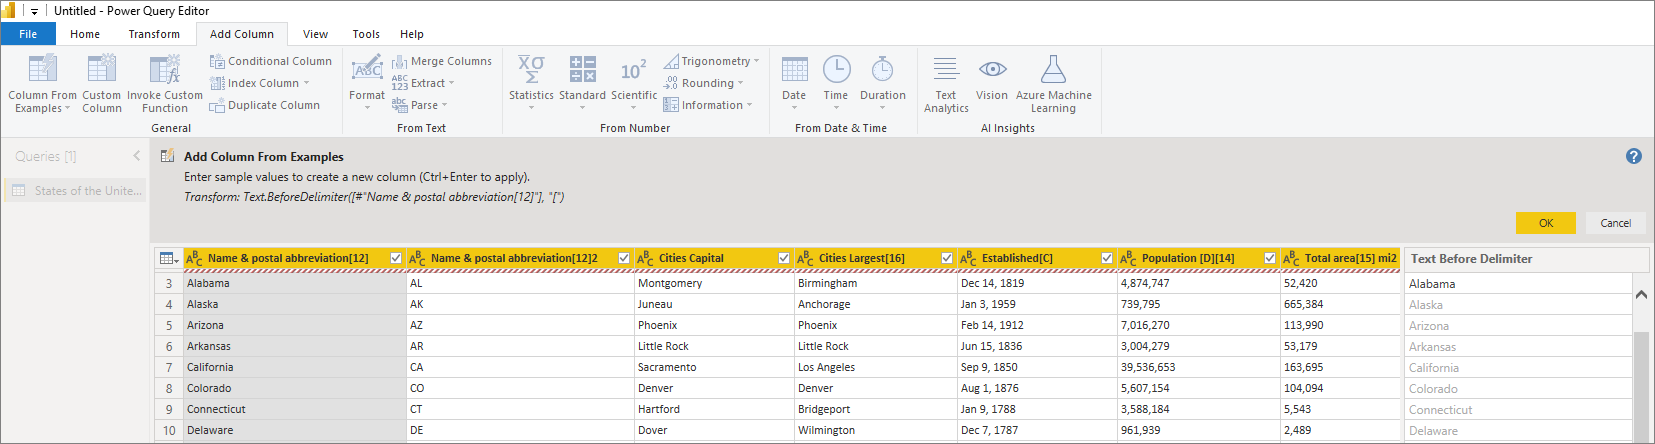 Screenshot of Power Query Editor, showing how to add a column from examples in Power B I Desktop.